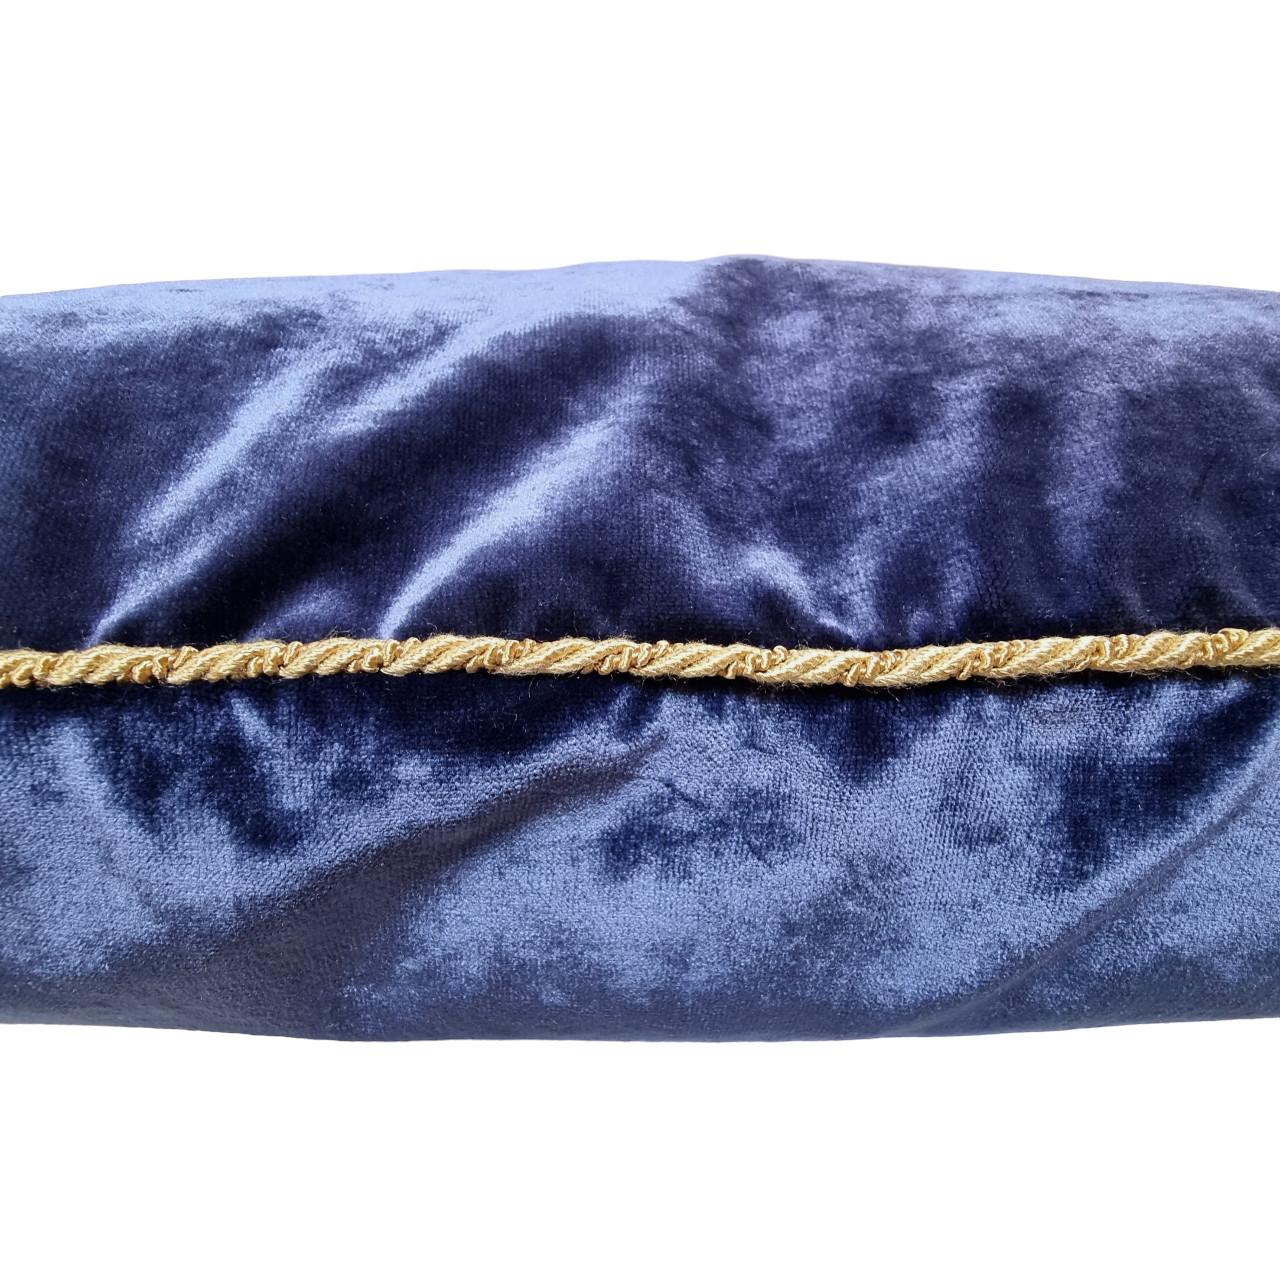 Hand-Crafted Embroidered Blue Velvet Throw Pillow with Tassels For Sale